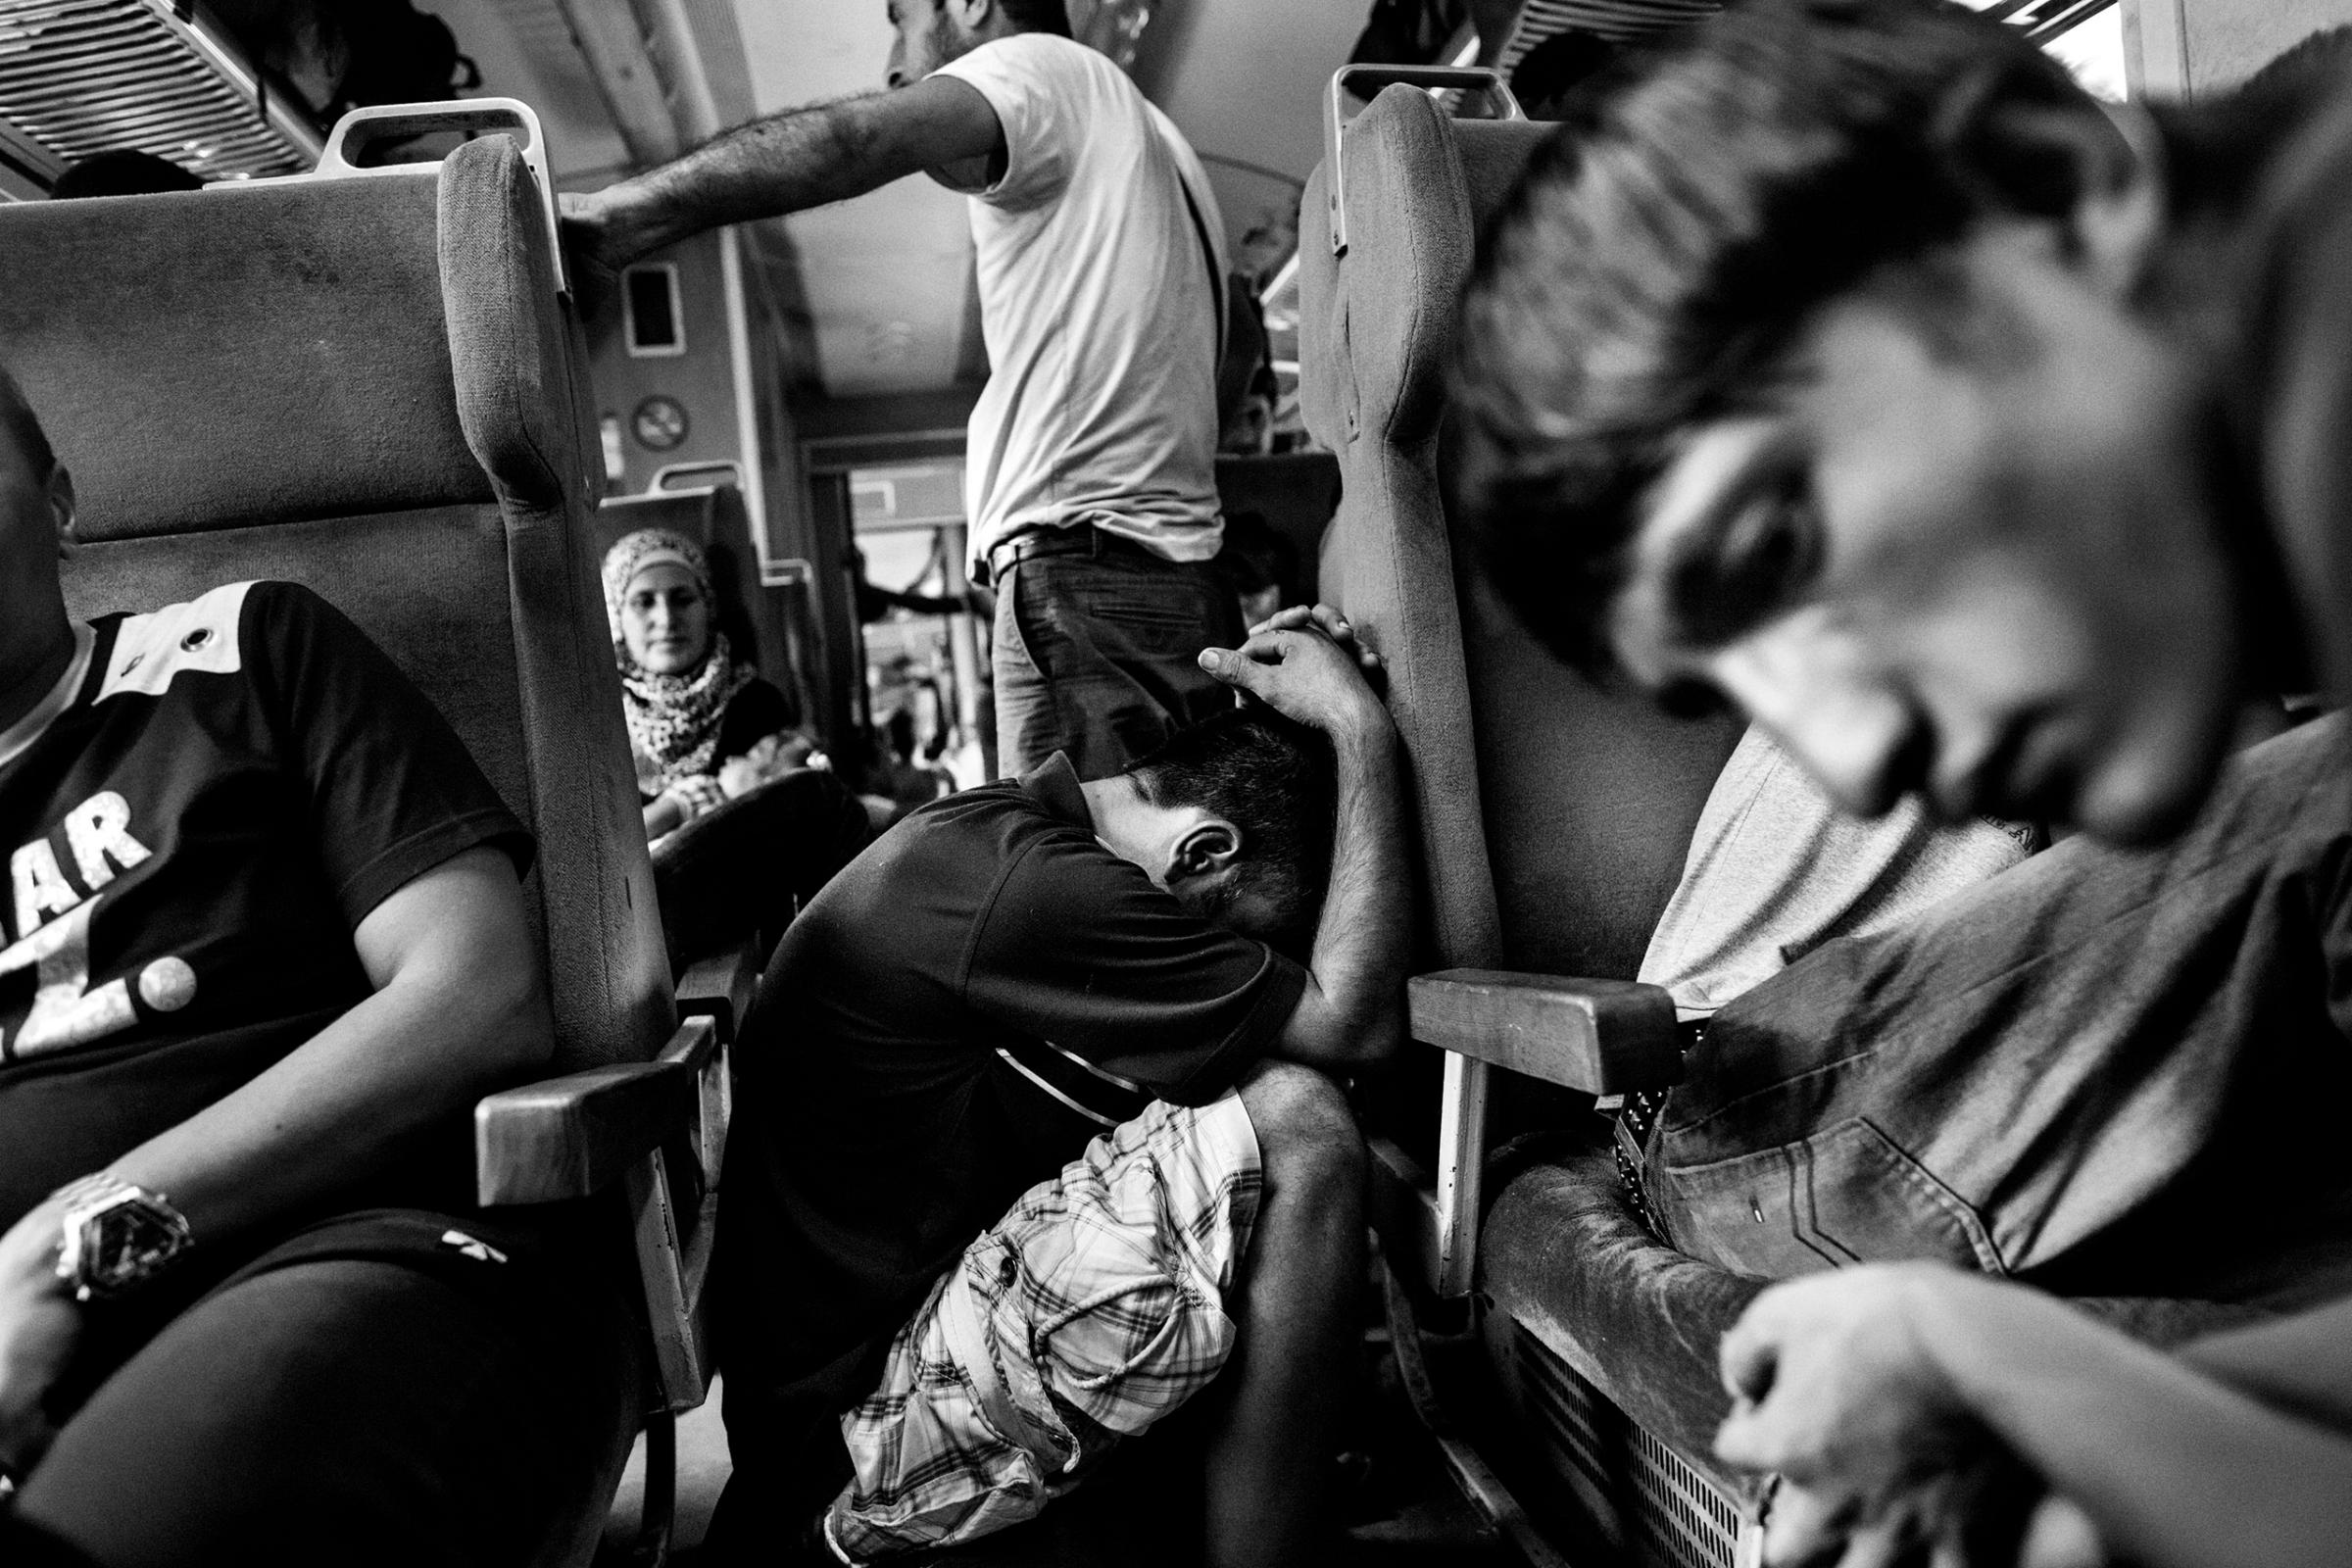 Refugees, largely from Syria and Afghanistan, travel by train through Macedonia Aug. 27, 2015.